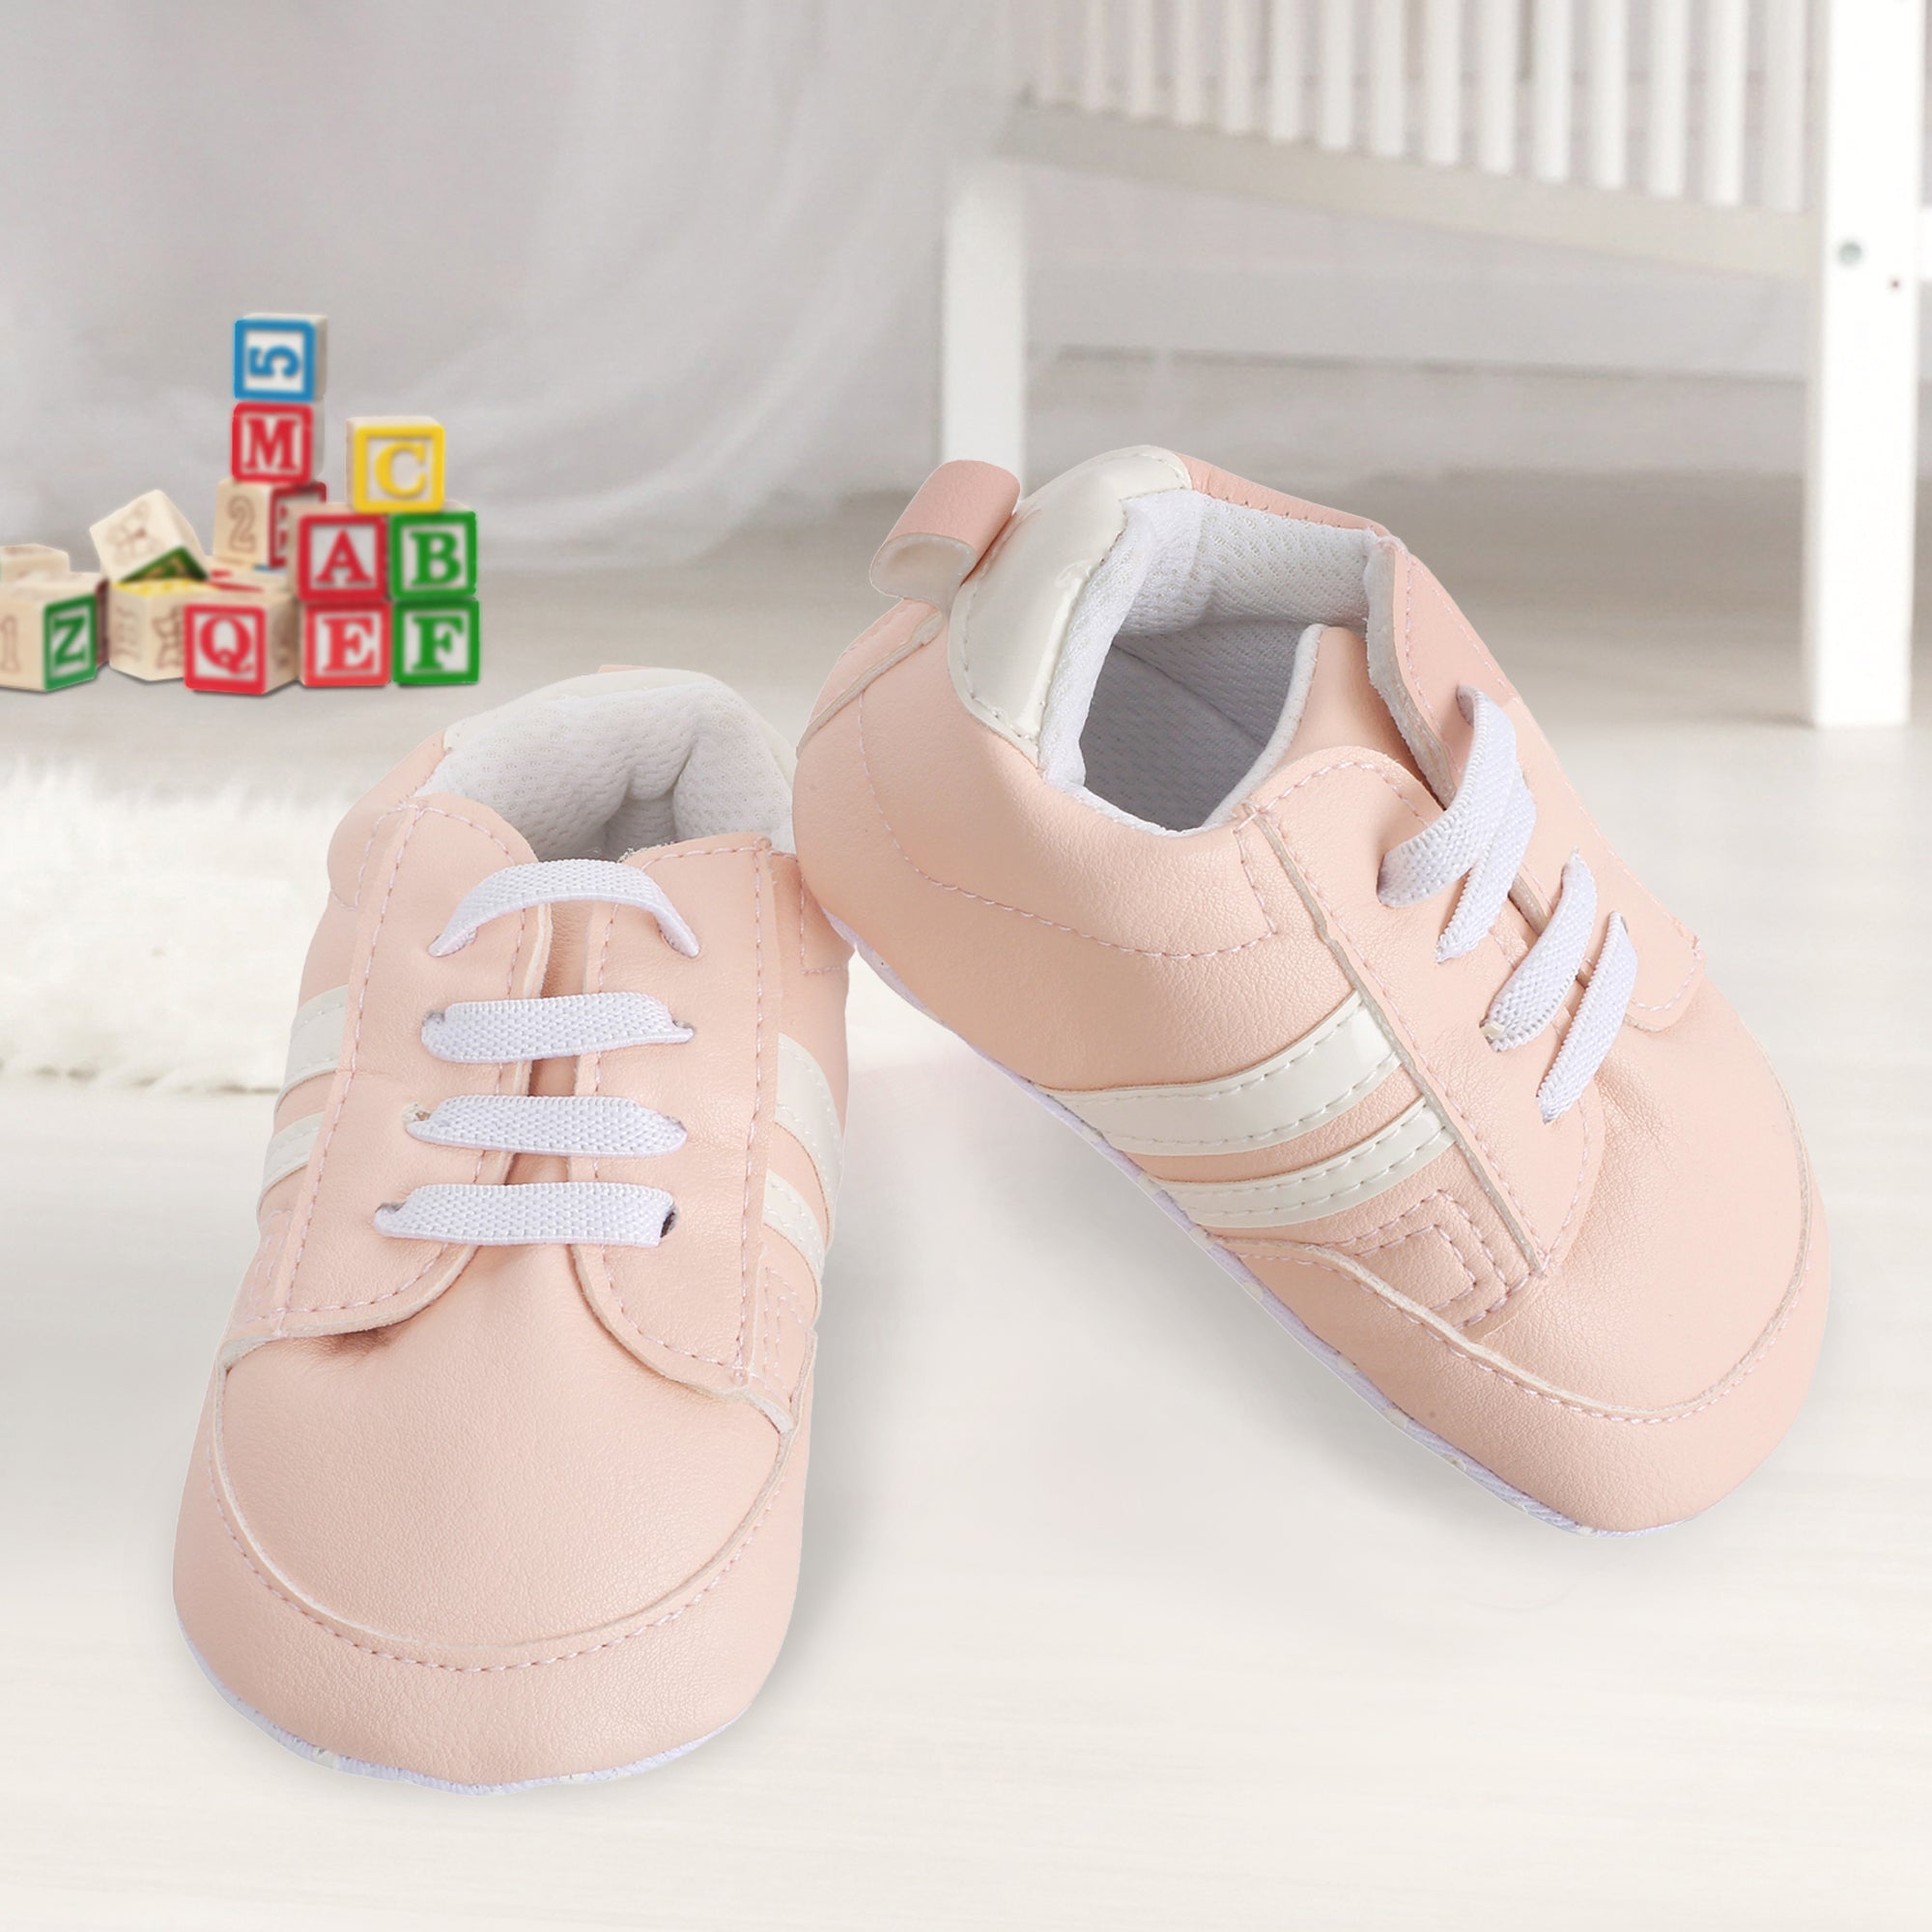 Baby Moo Striped Peach Lace Up Sneakers - Baby Moo